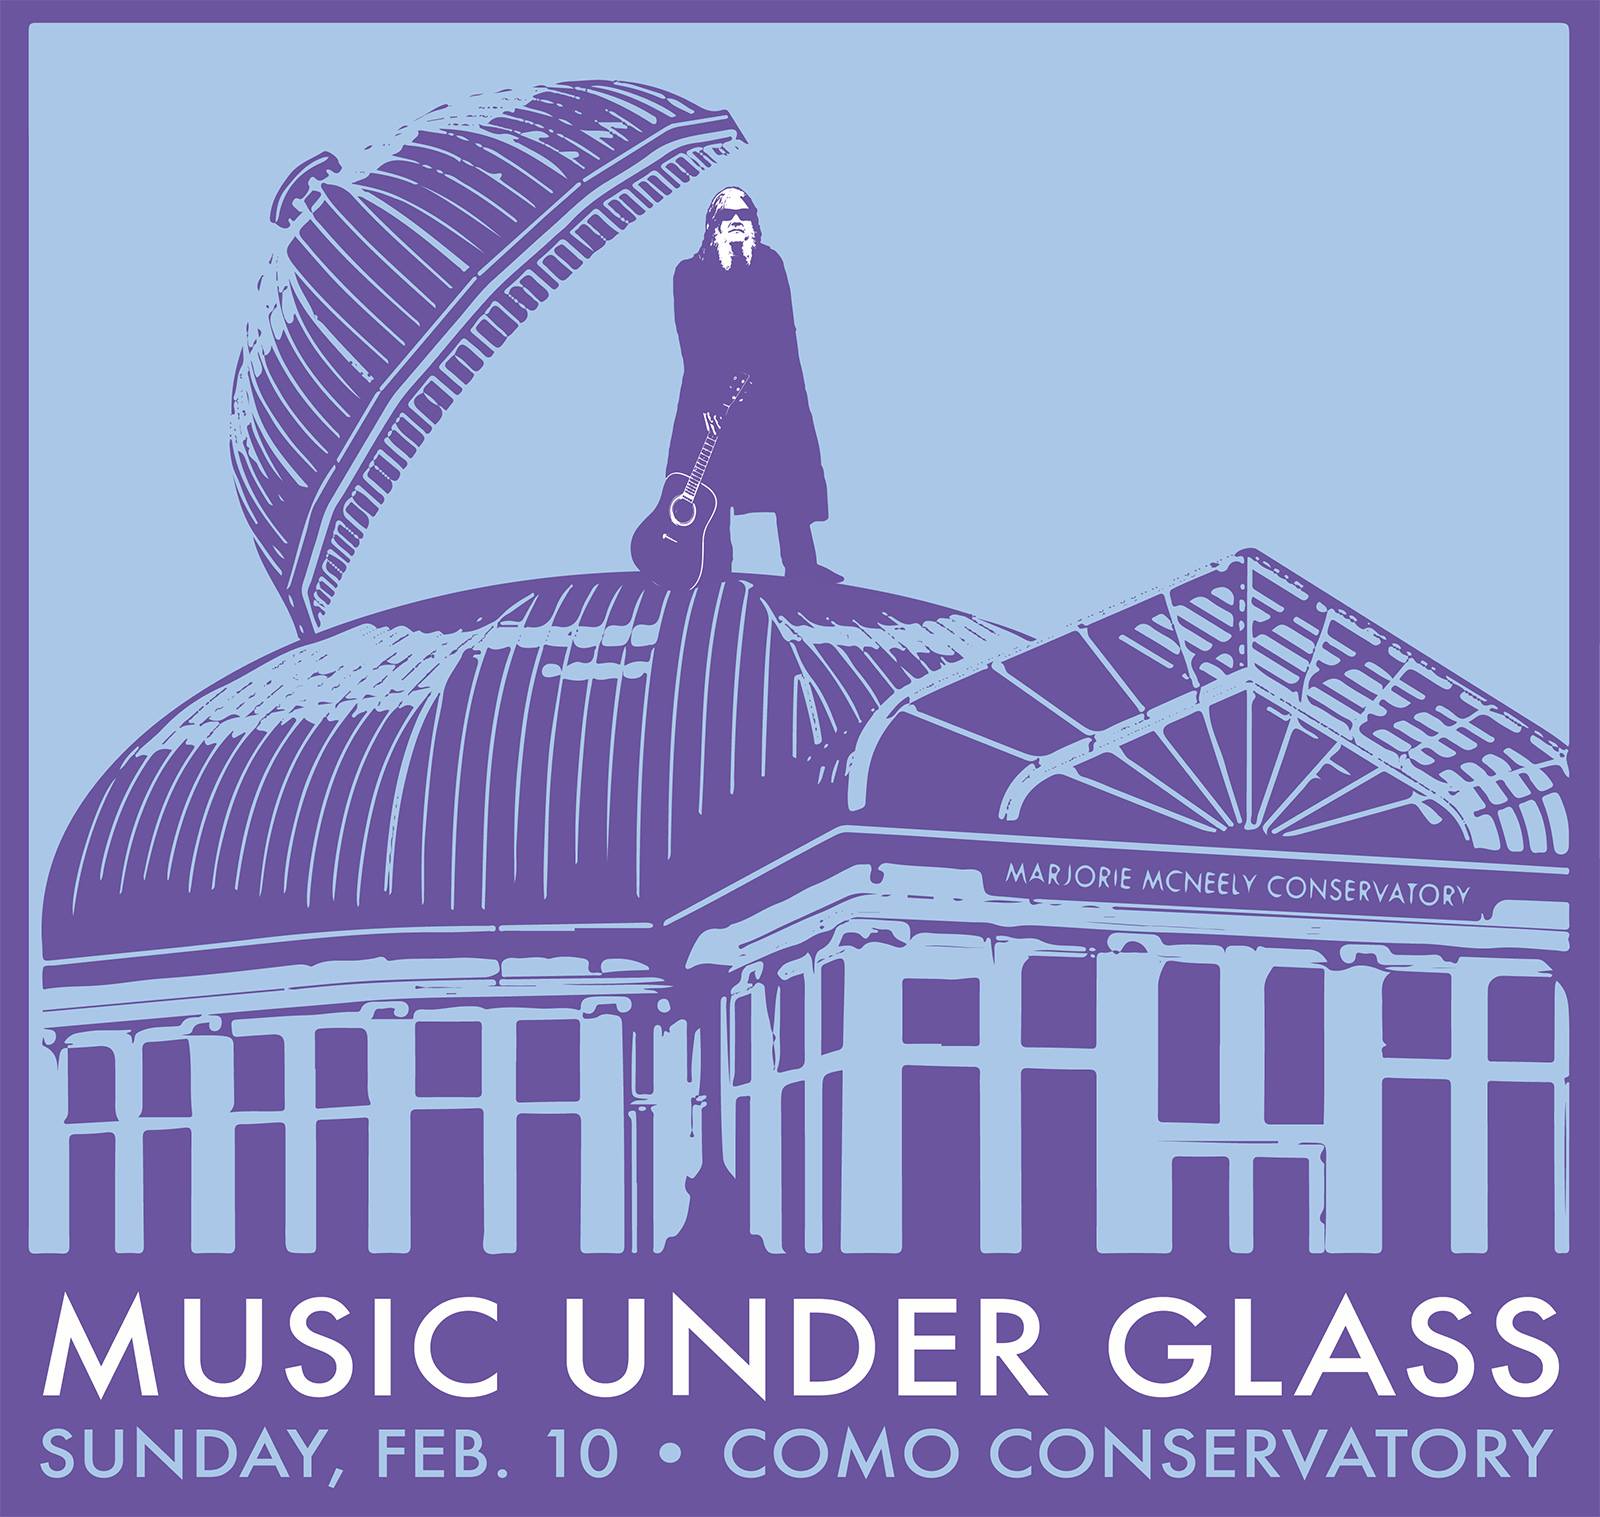 promotional image for music under glass series, Feb 10 at Como Zoo Conservatory